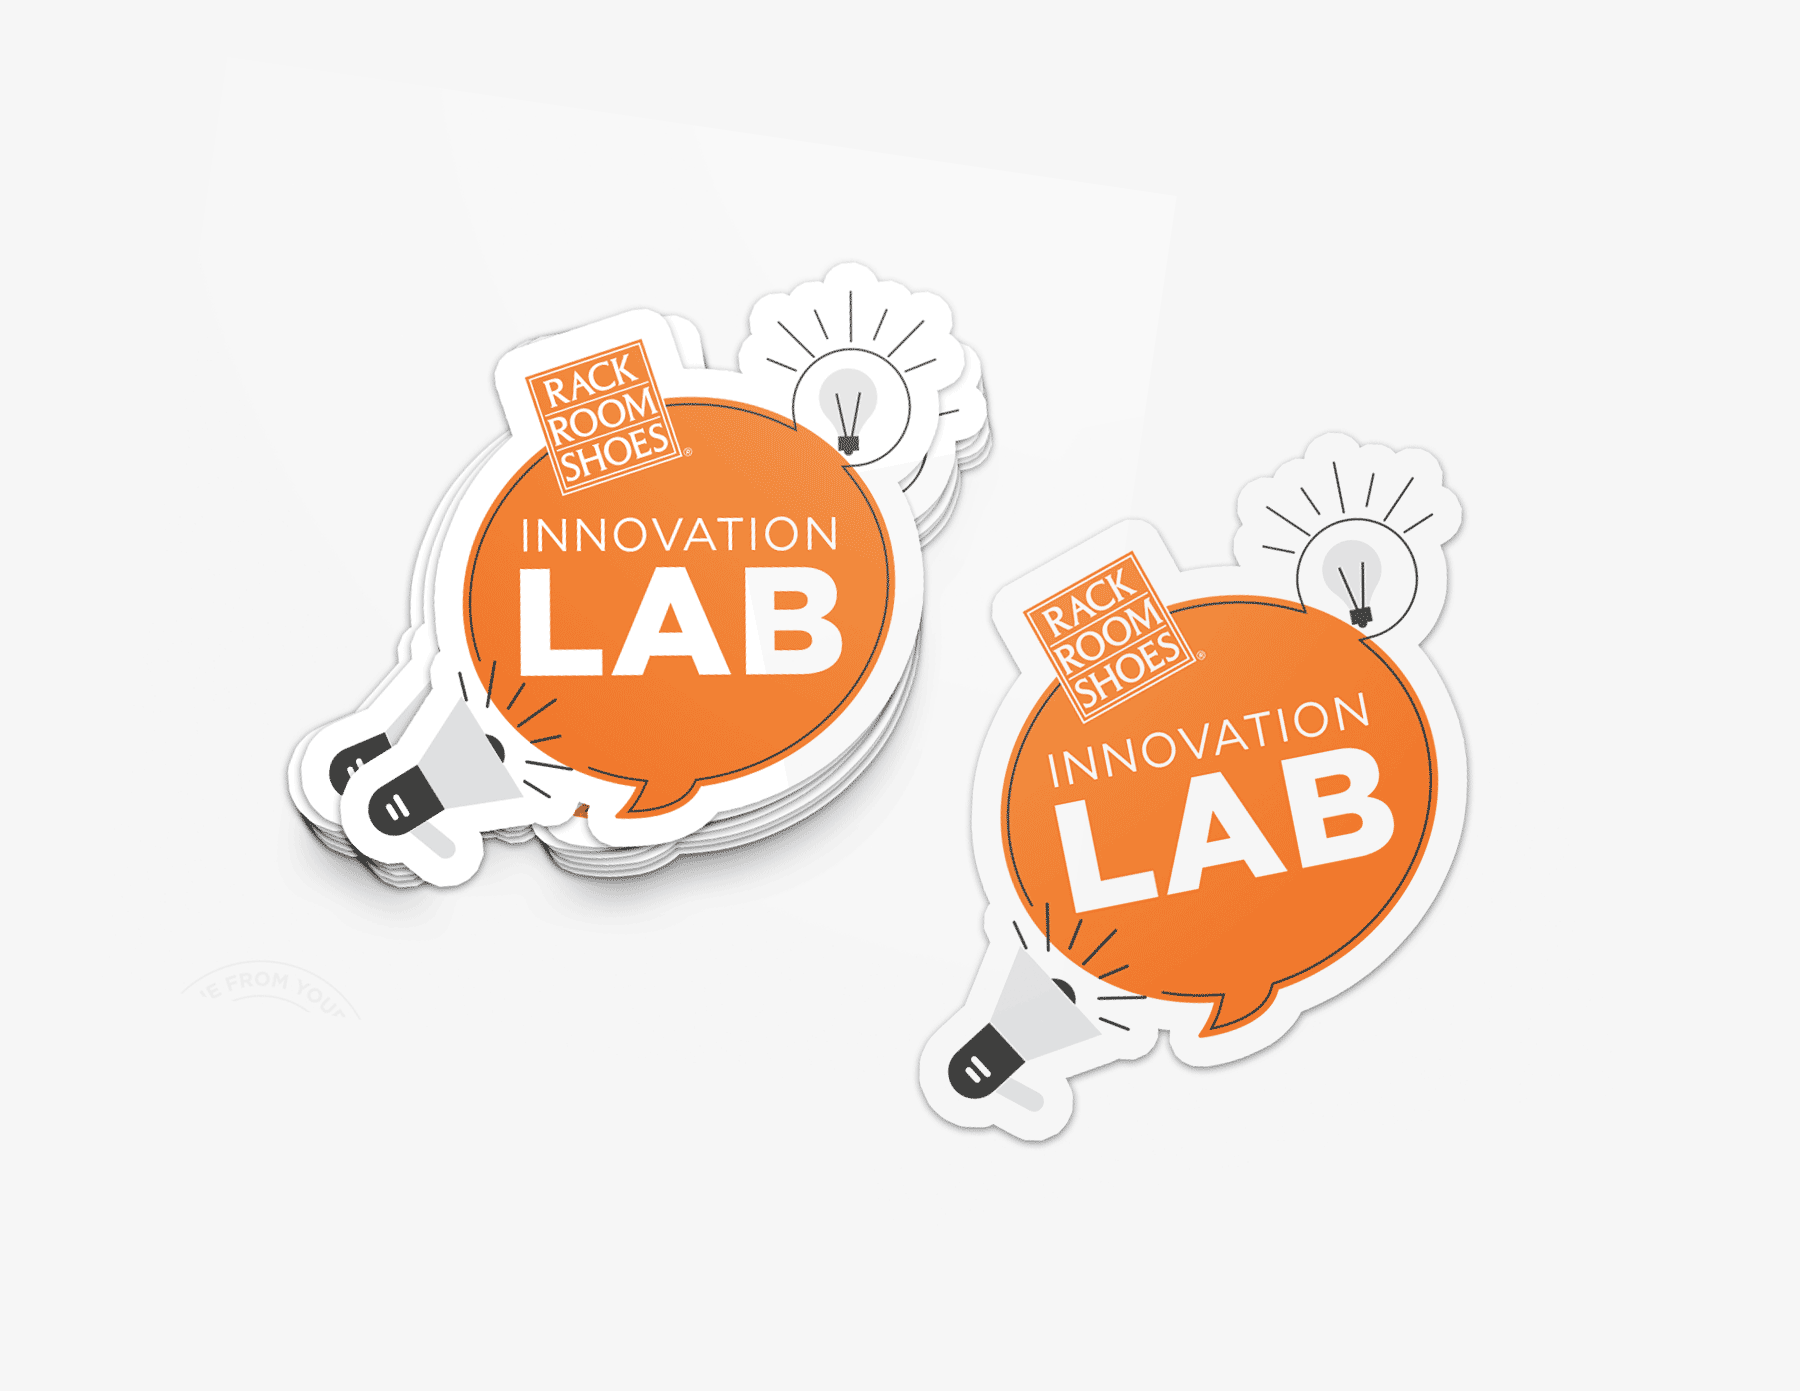 a stack of stickers with the innovation lab logo on them